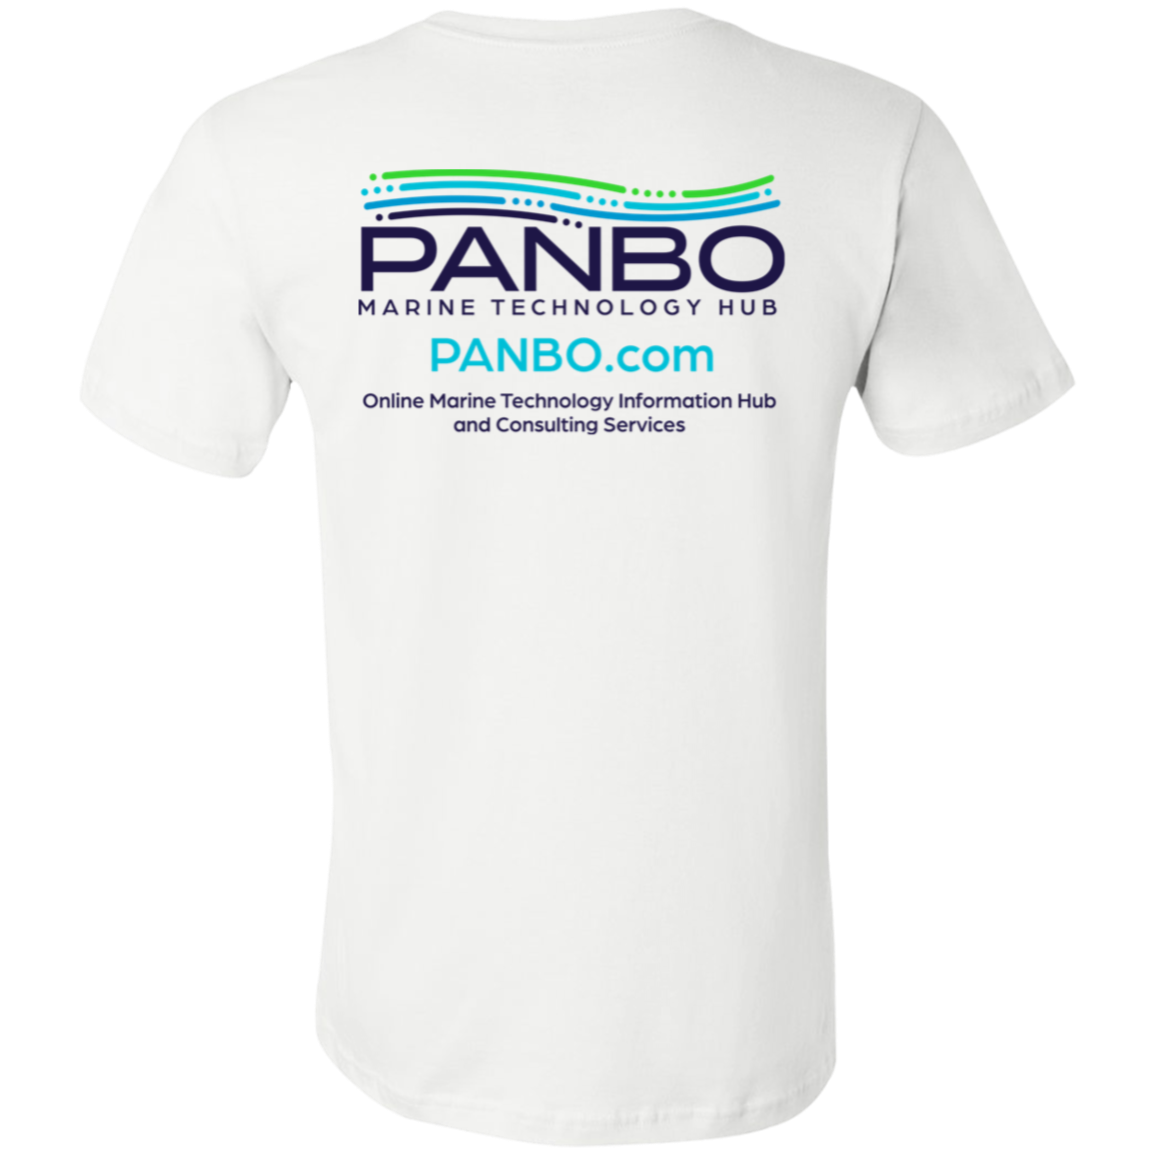 Panbo - Bella and Canvas Unisex Short-Sleeve T-Shirt